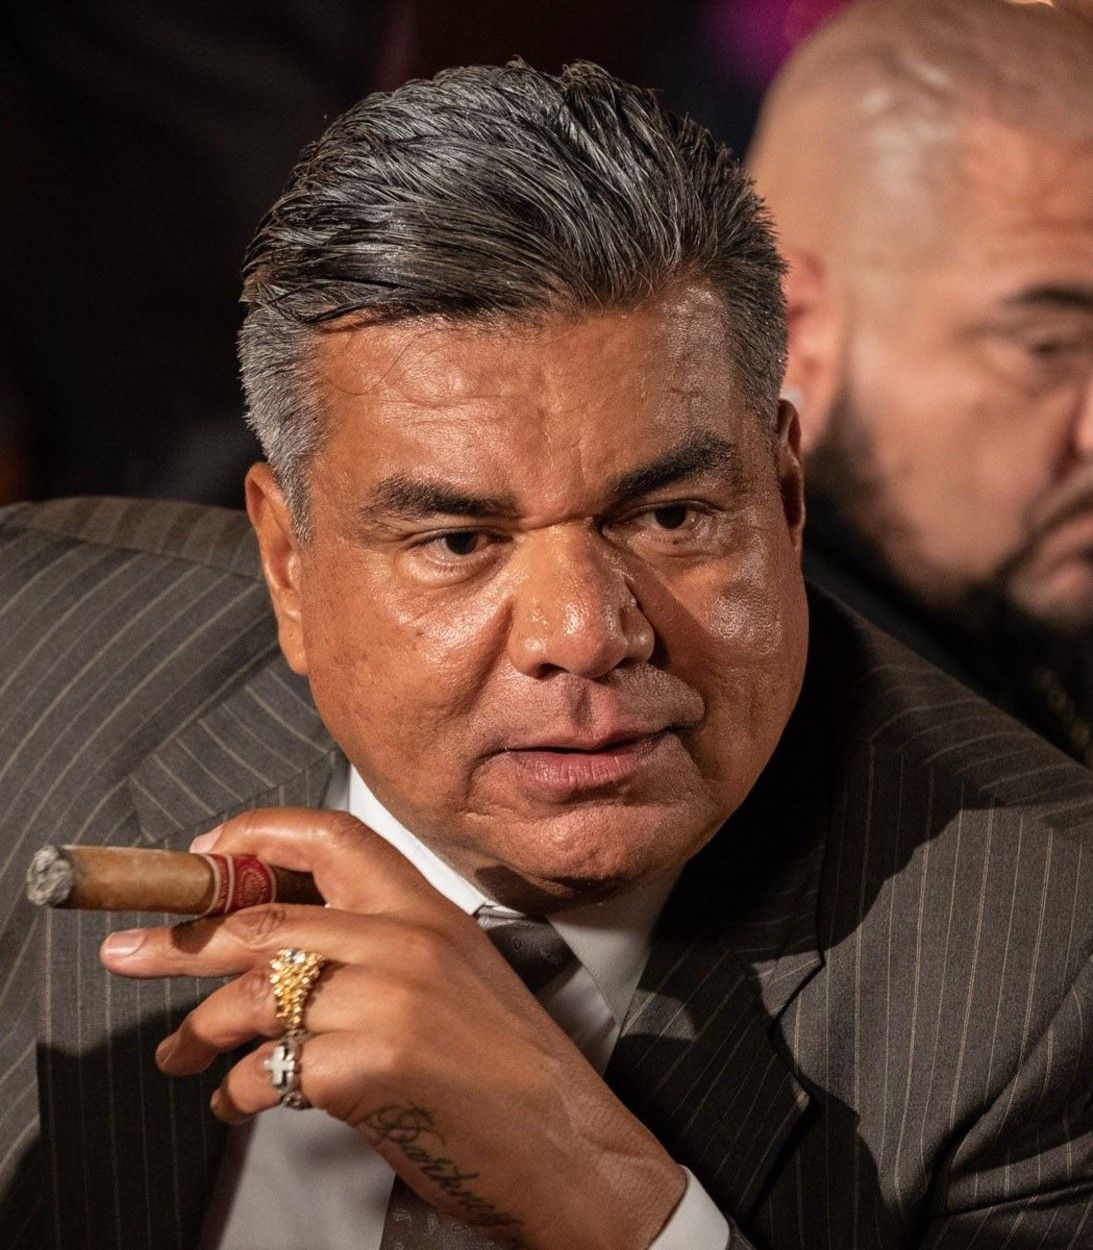 George Lopez in The Tax Collector vertical